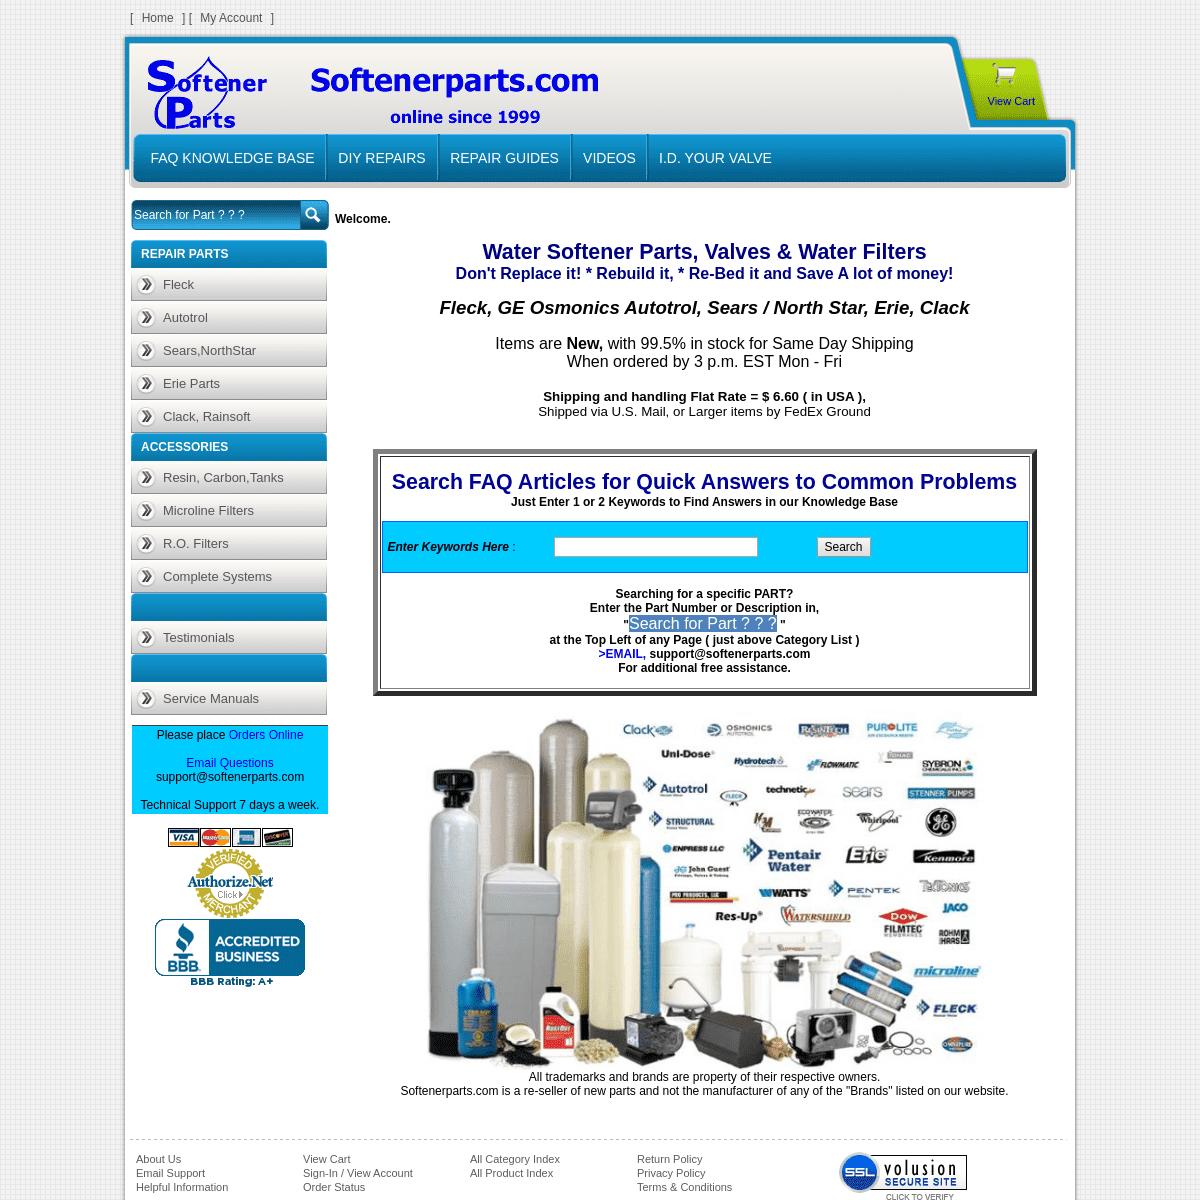 A complete backup of softenerparts.com